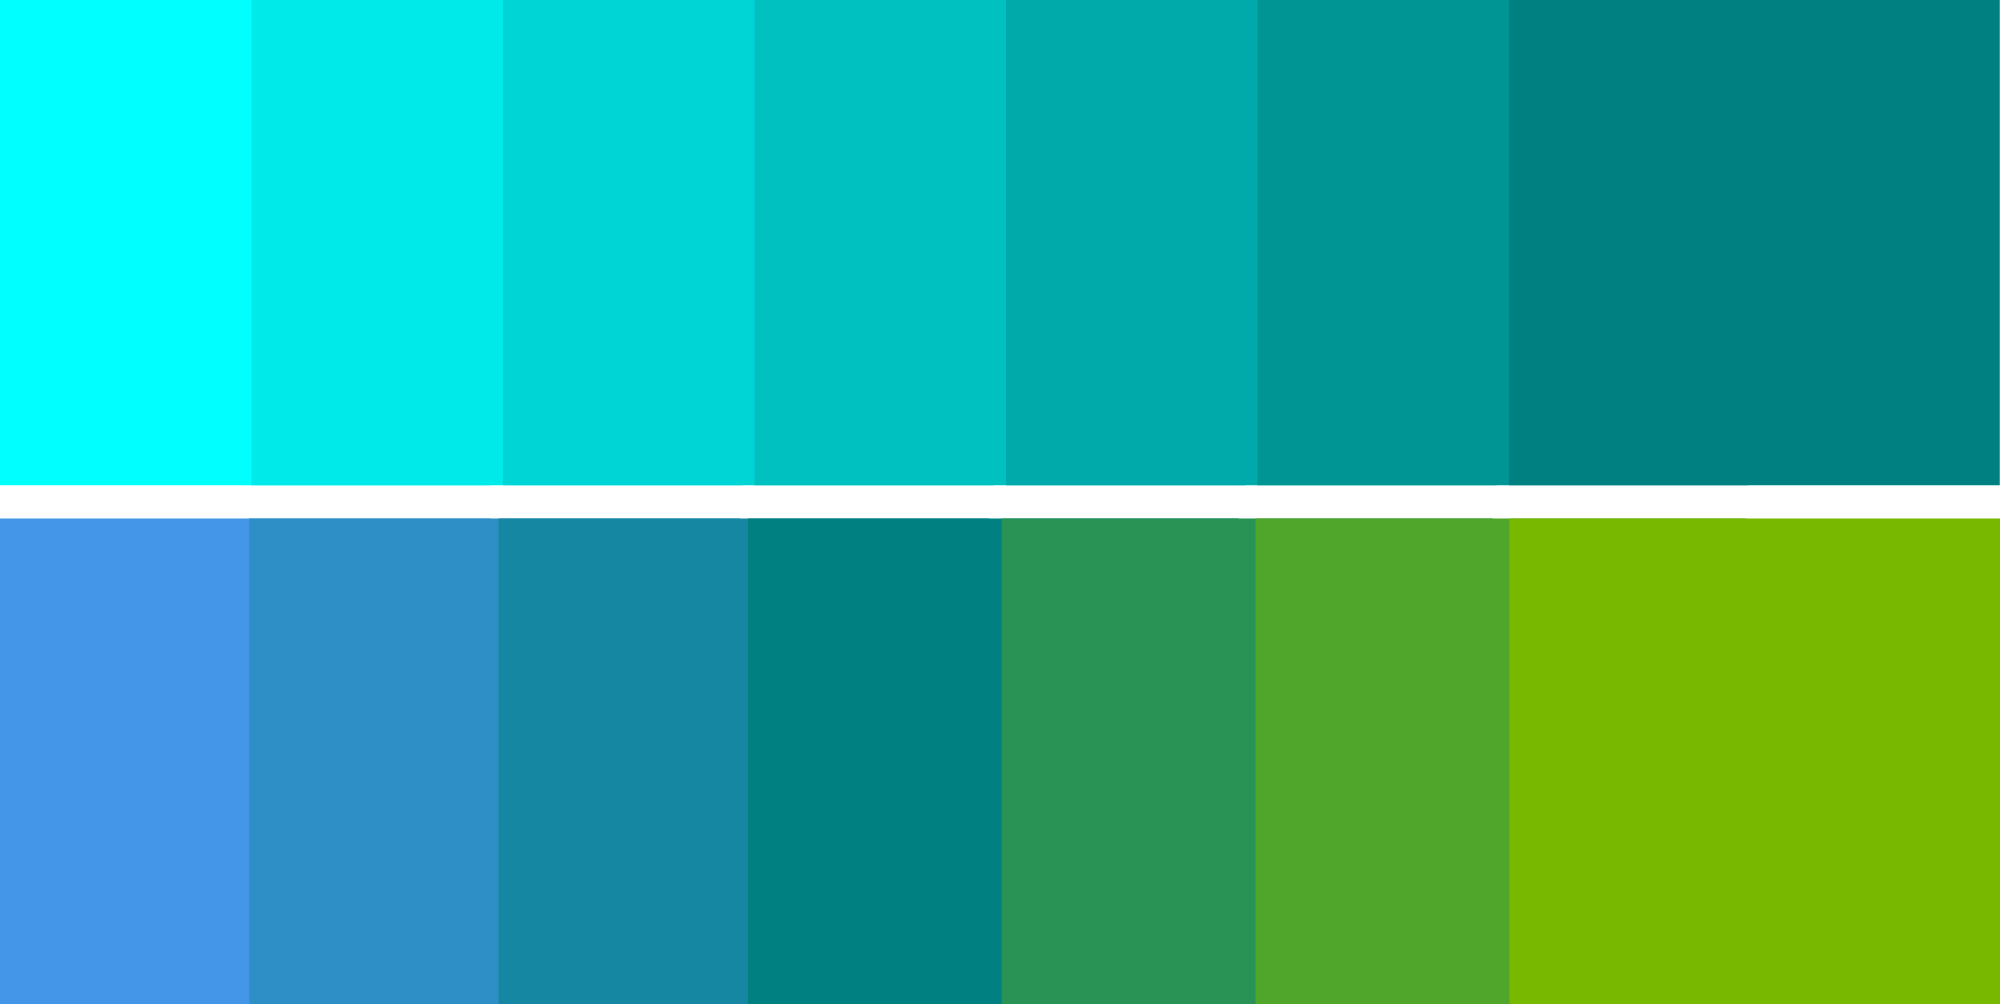 color palette from teal blue to teal green